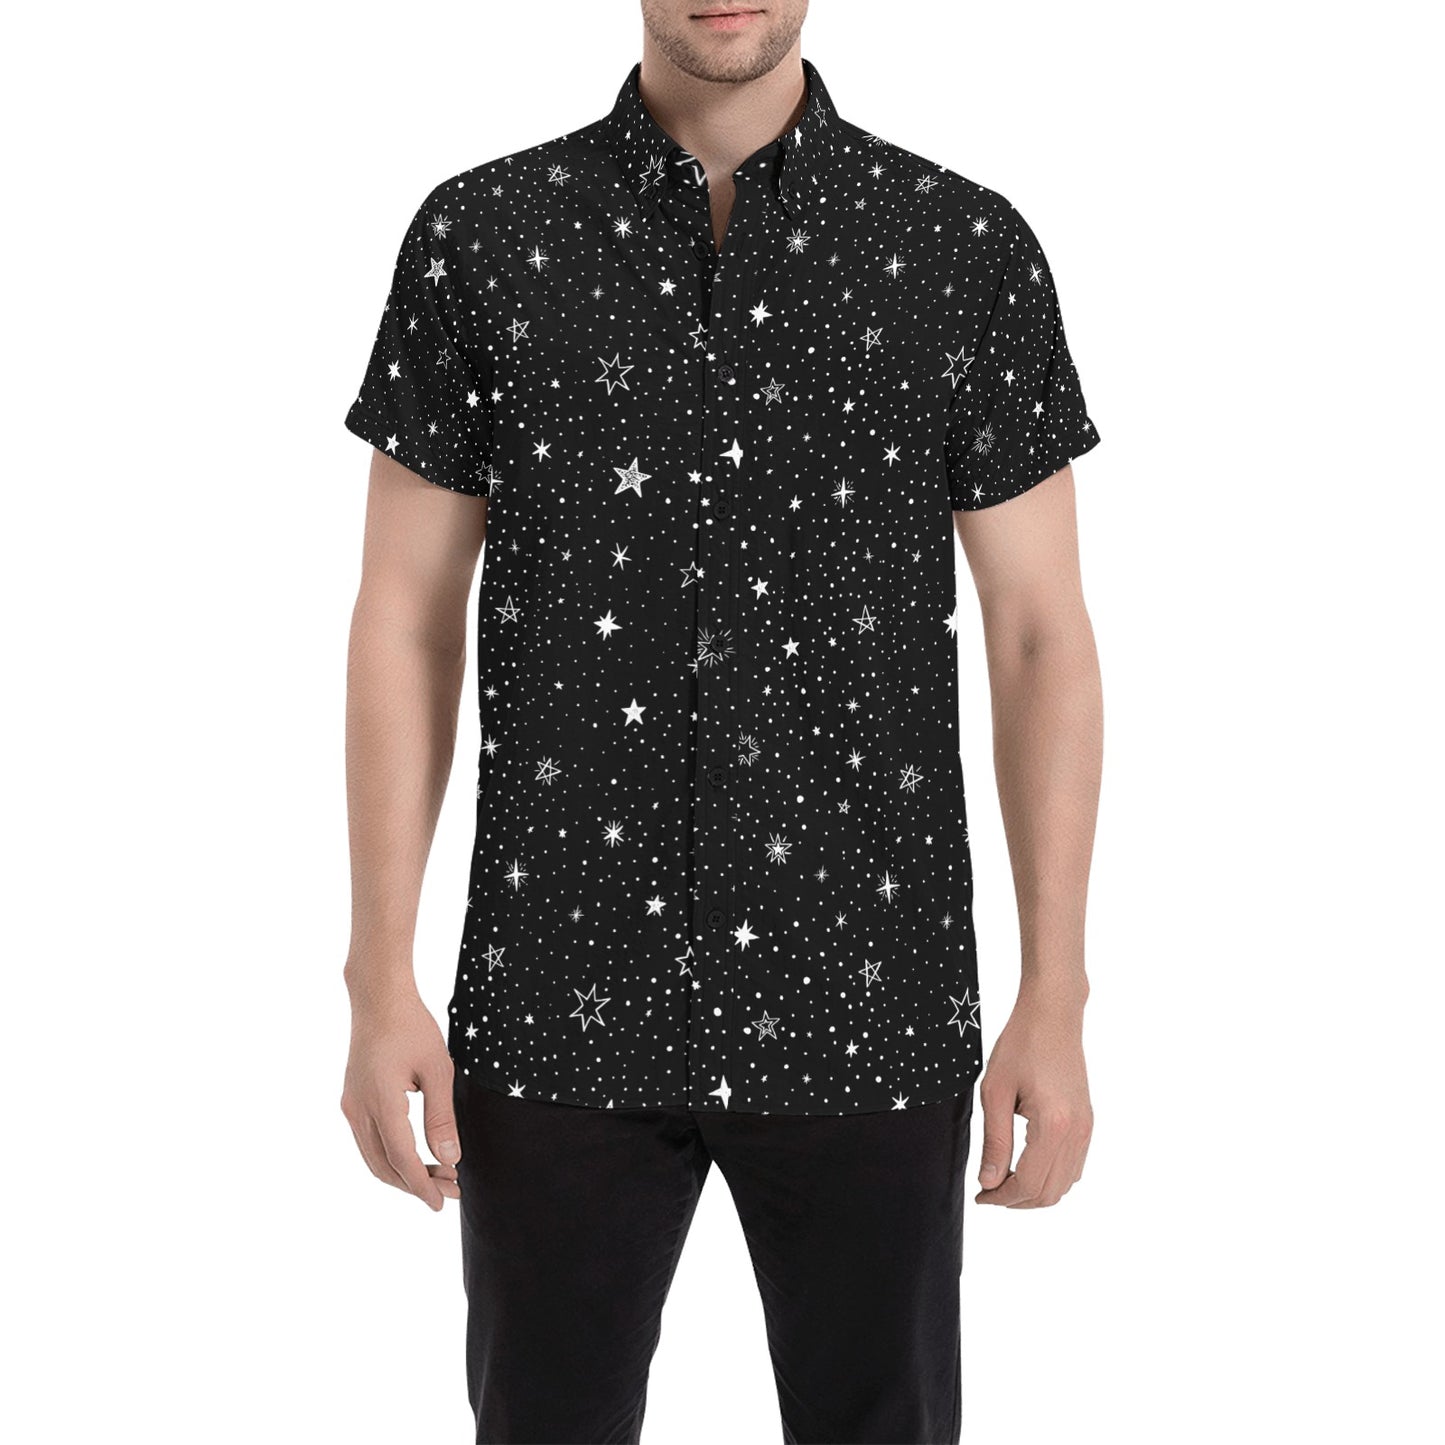 Space Short Sleeve Men Button Down Shirt, Black White Stars Constellation Celestial Geek Theme Print Casual Up Collared Dress Plus Size